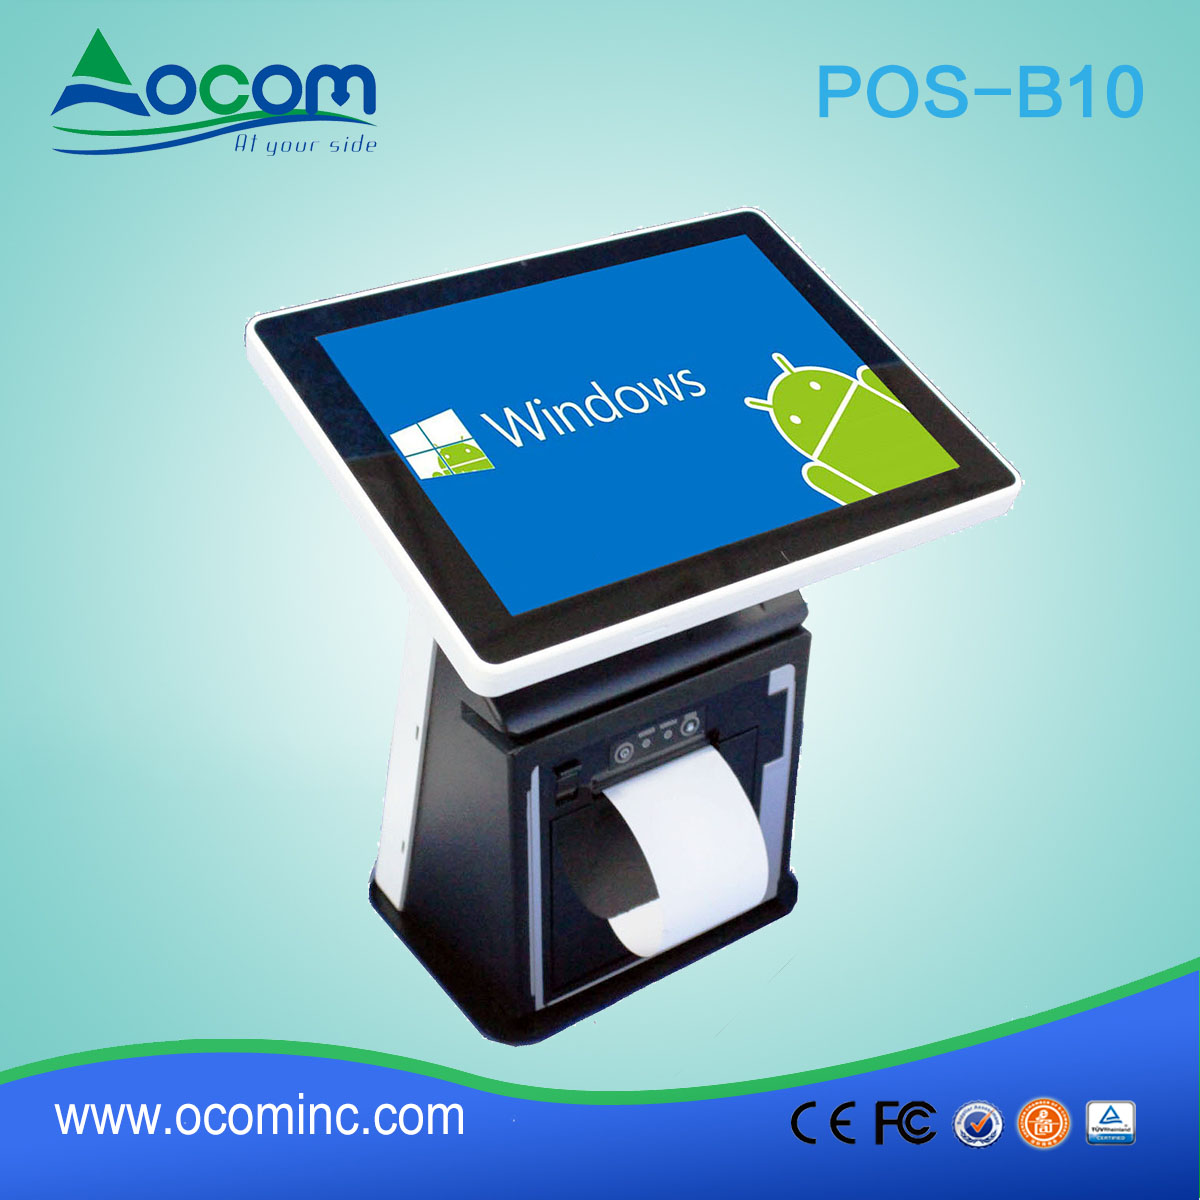 POS-B10---China factory made all in one touch screen 10.1" pos terminal with thermal printer machine